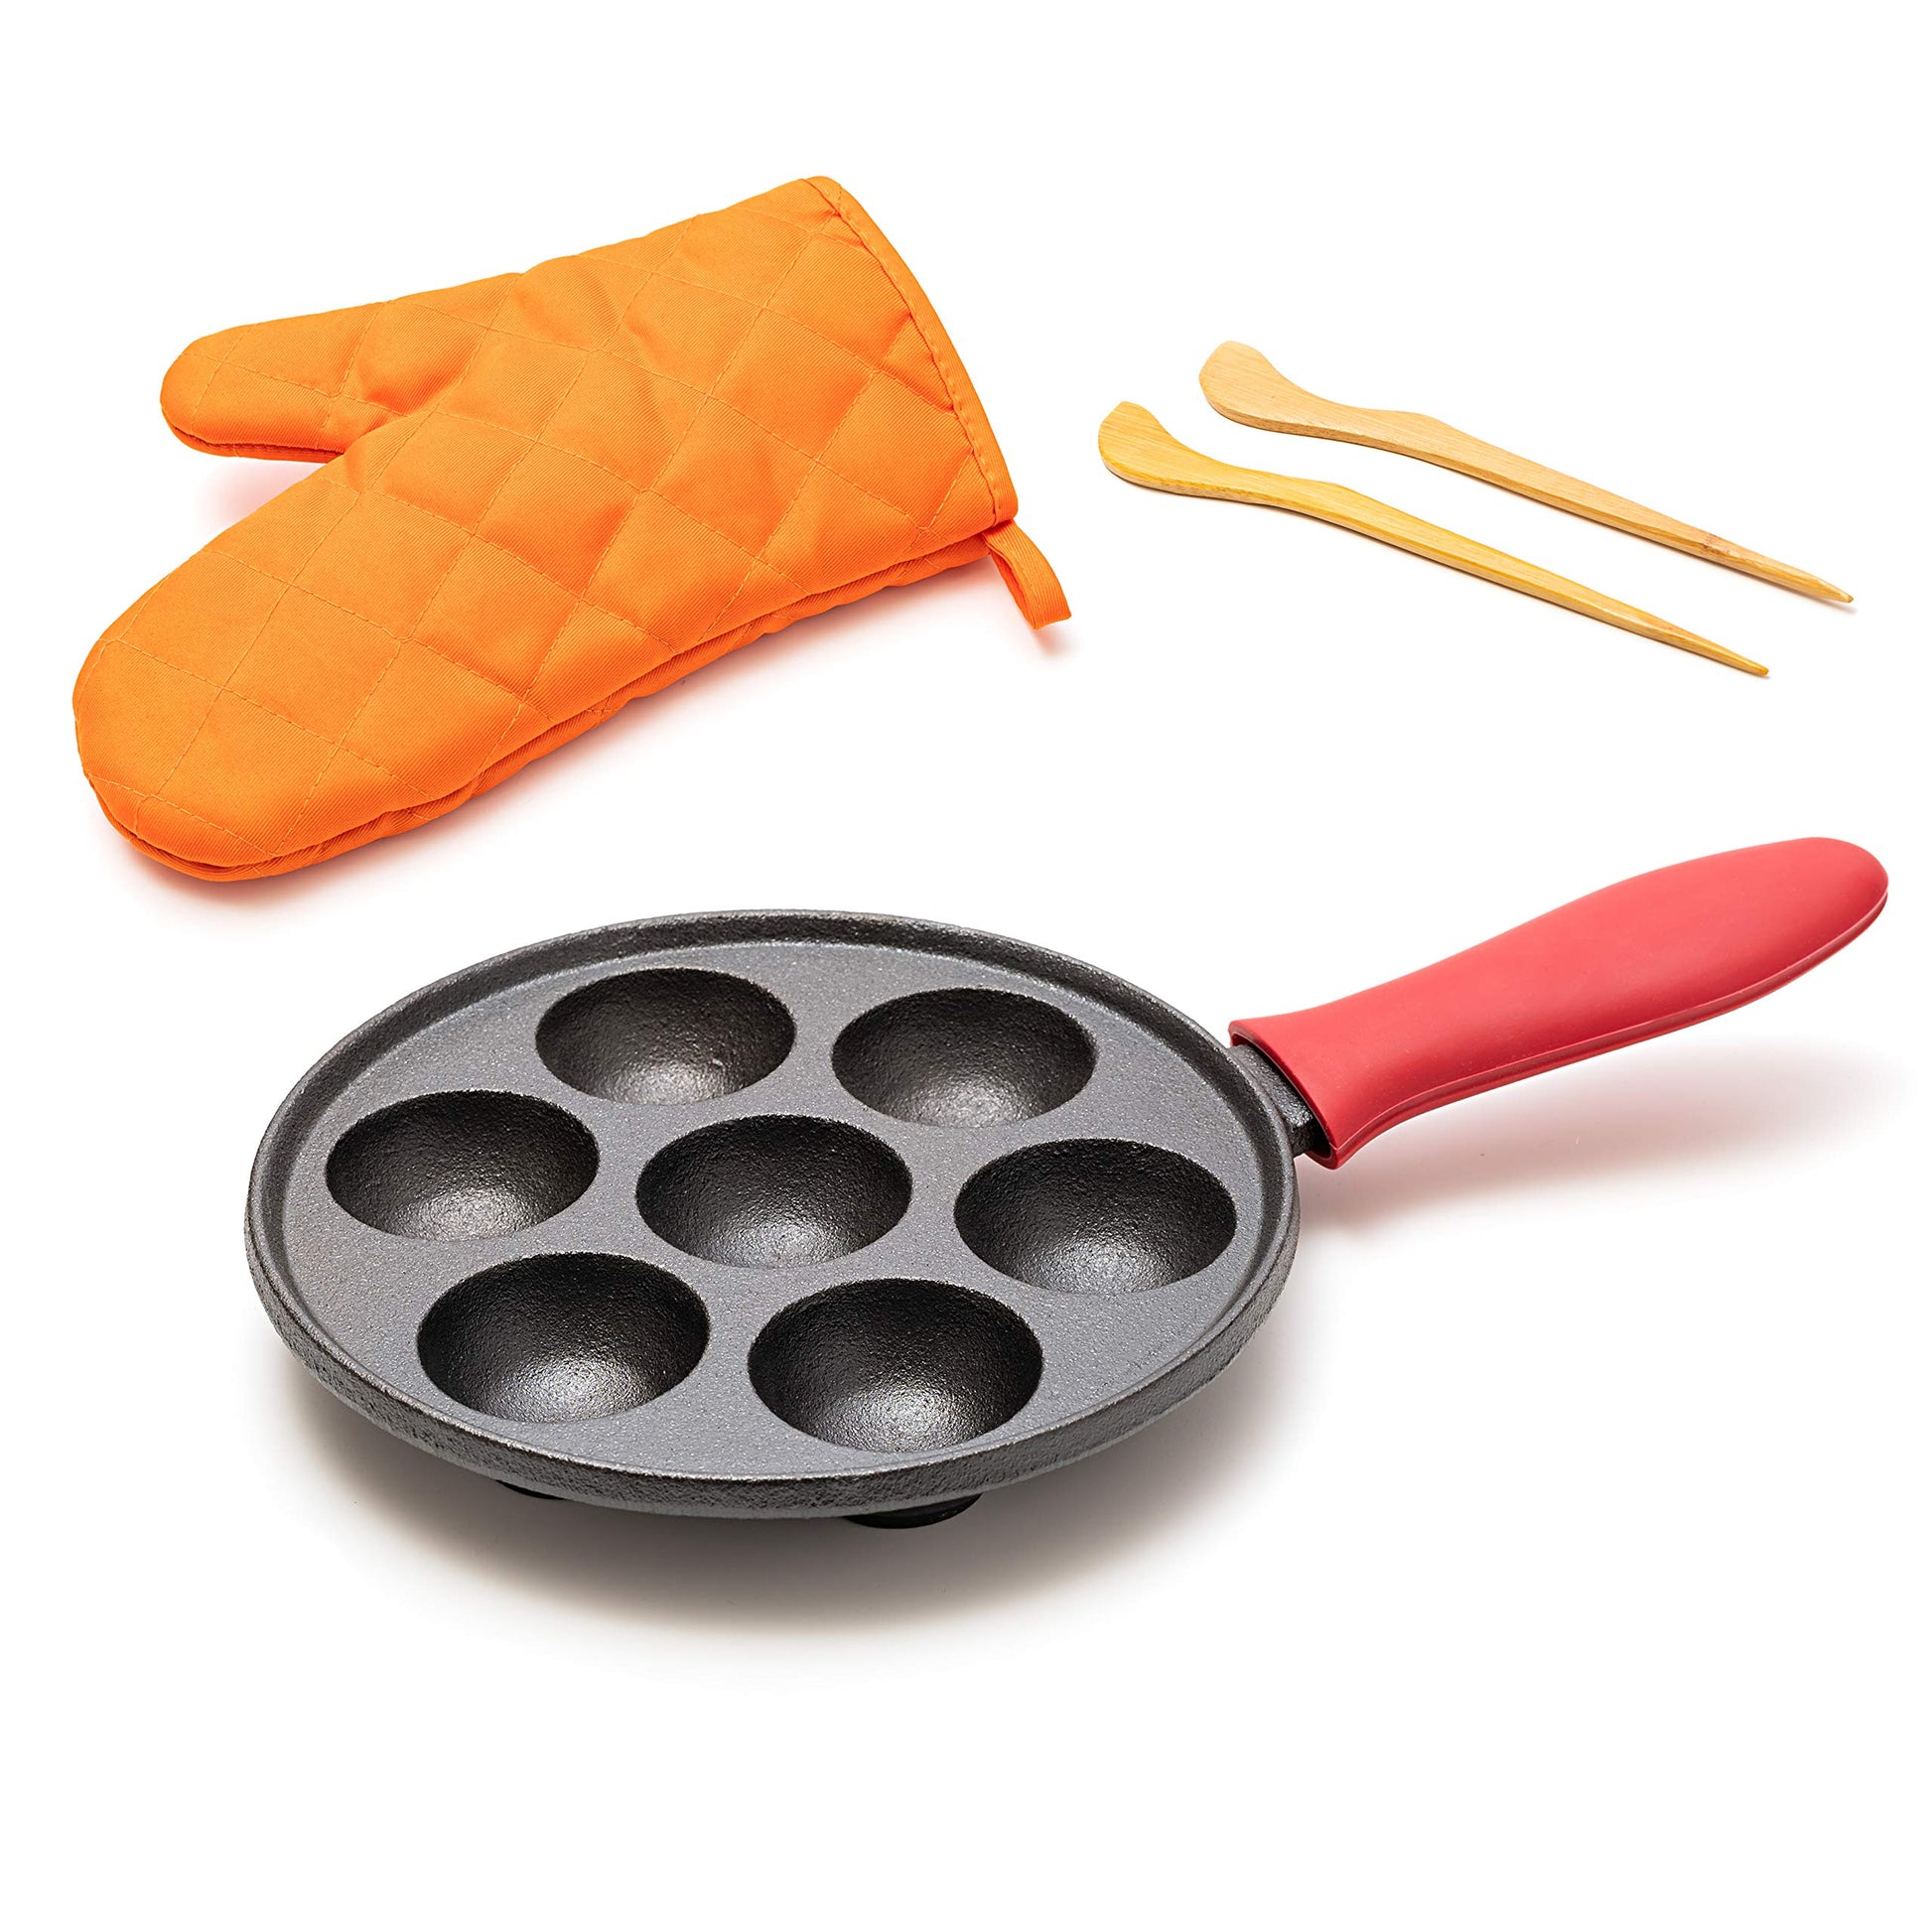 Bethany Housewares Aebleskiver Pan, 1 - Fry's Food Stores